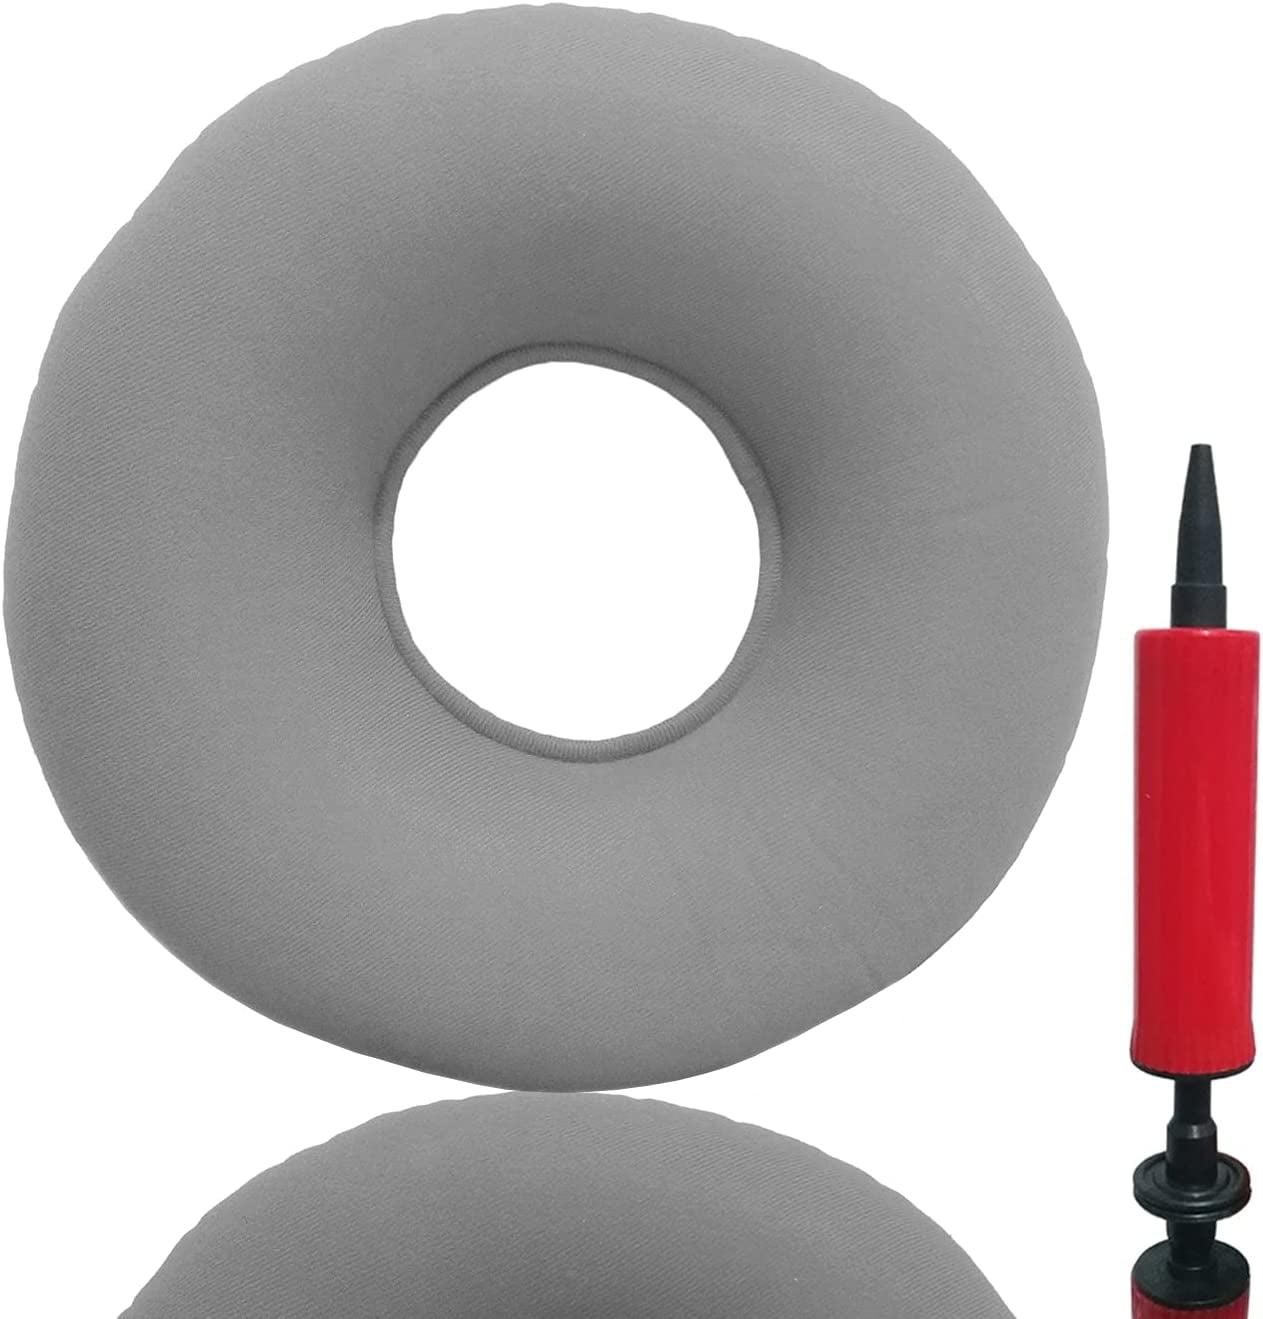 Dr. Frederick's Original Donut Pillow - 15 Inflatable Donut Cushion for  Tailbone Pain Relief - Seat Cushion for Hemorrhoids, Bed Sores, Prostatitis  